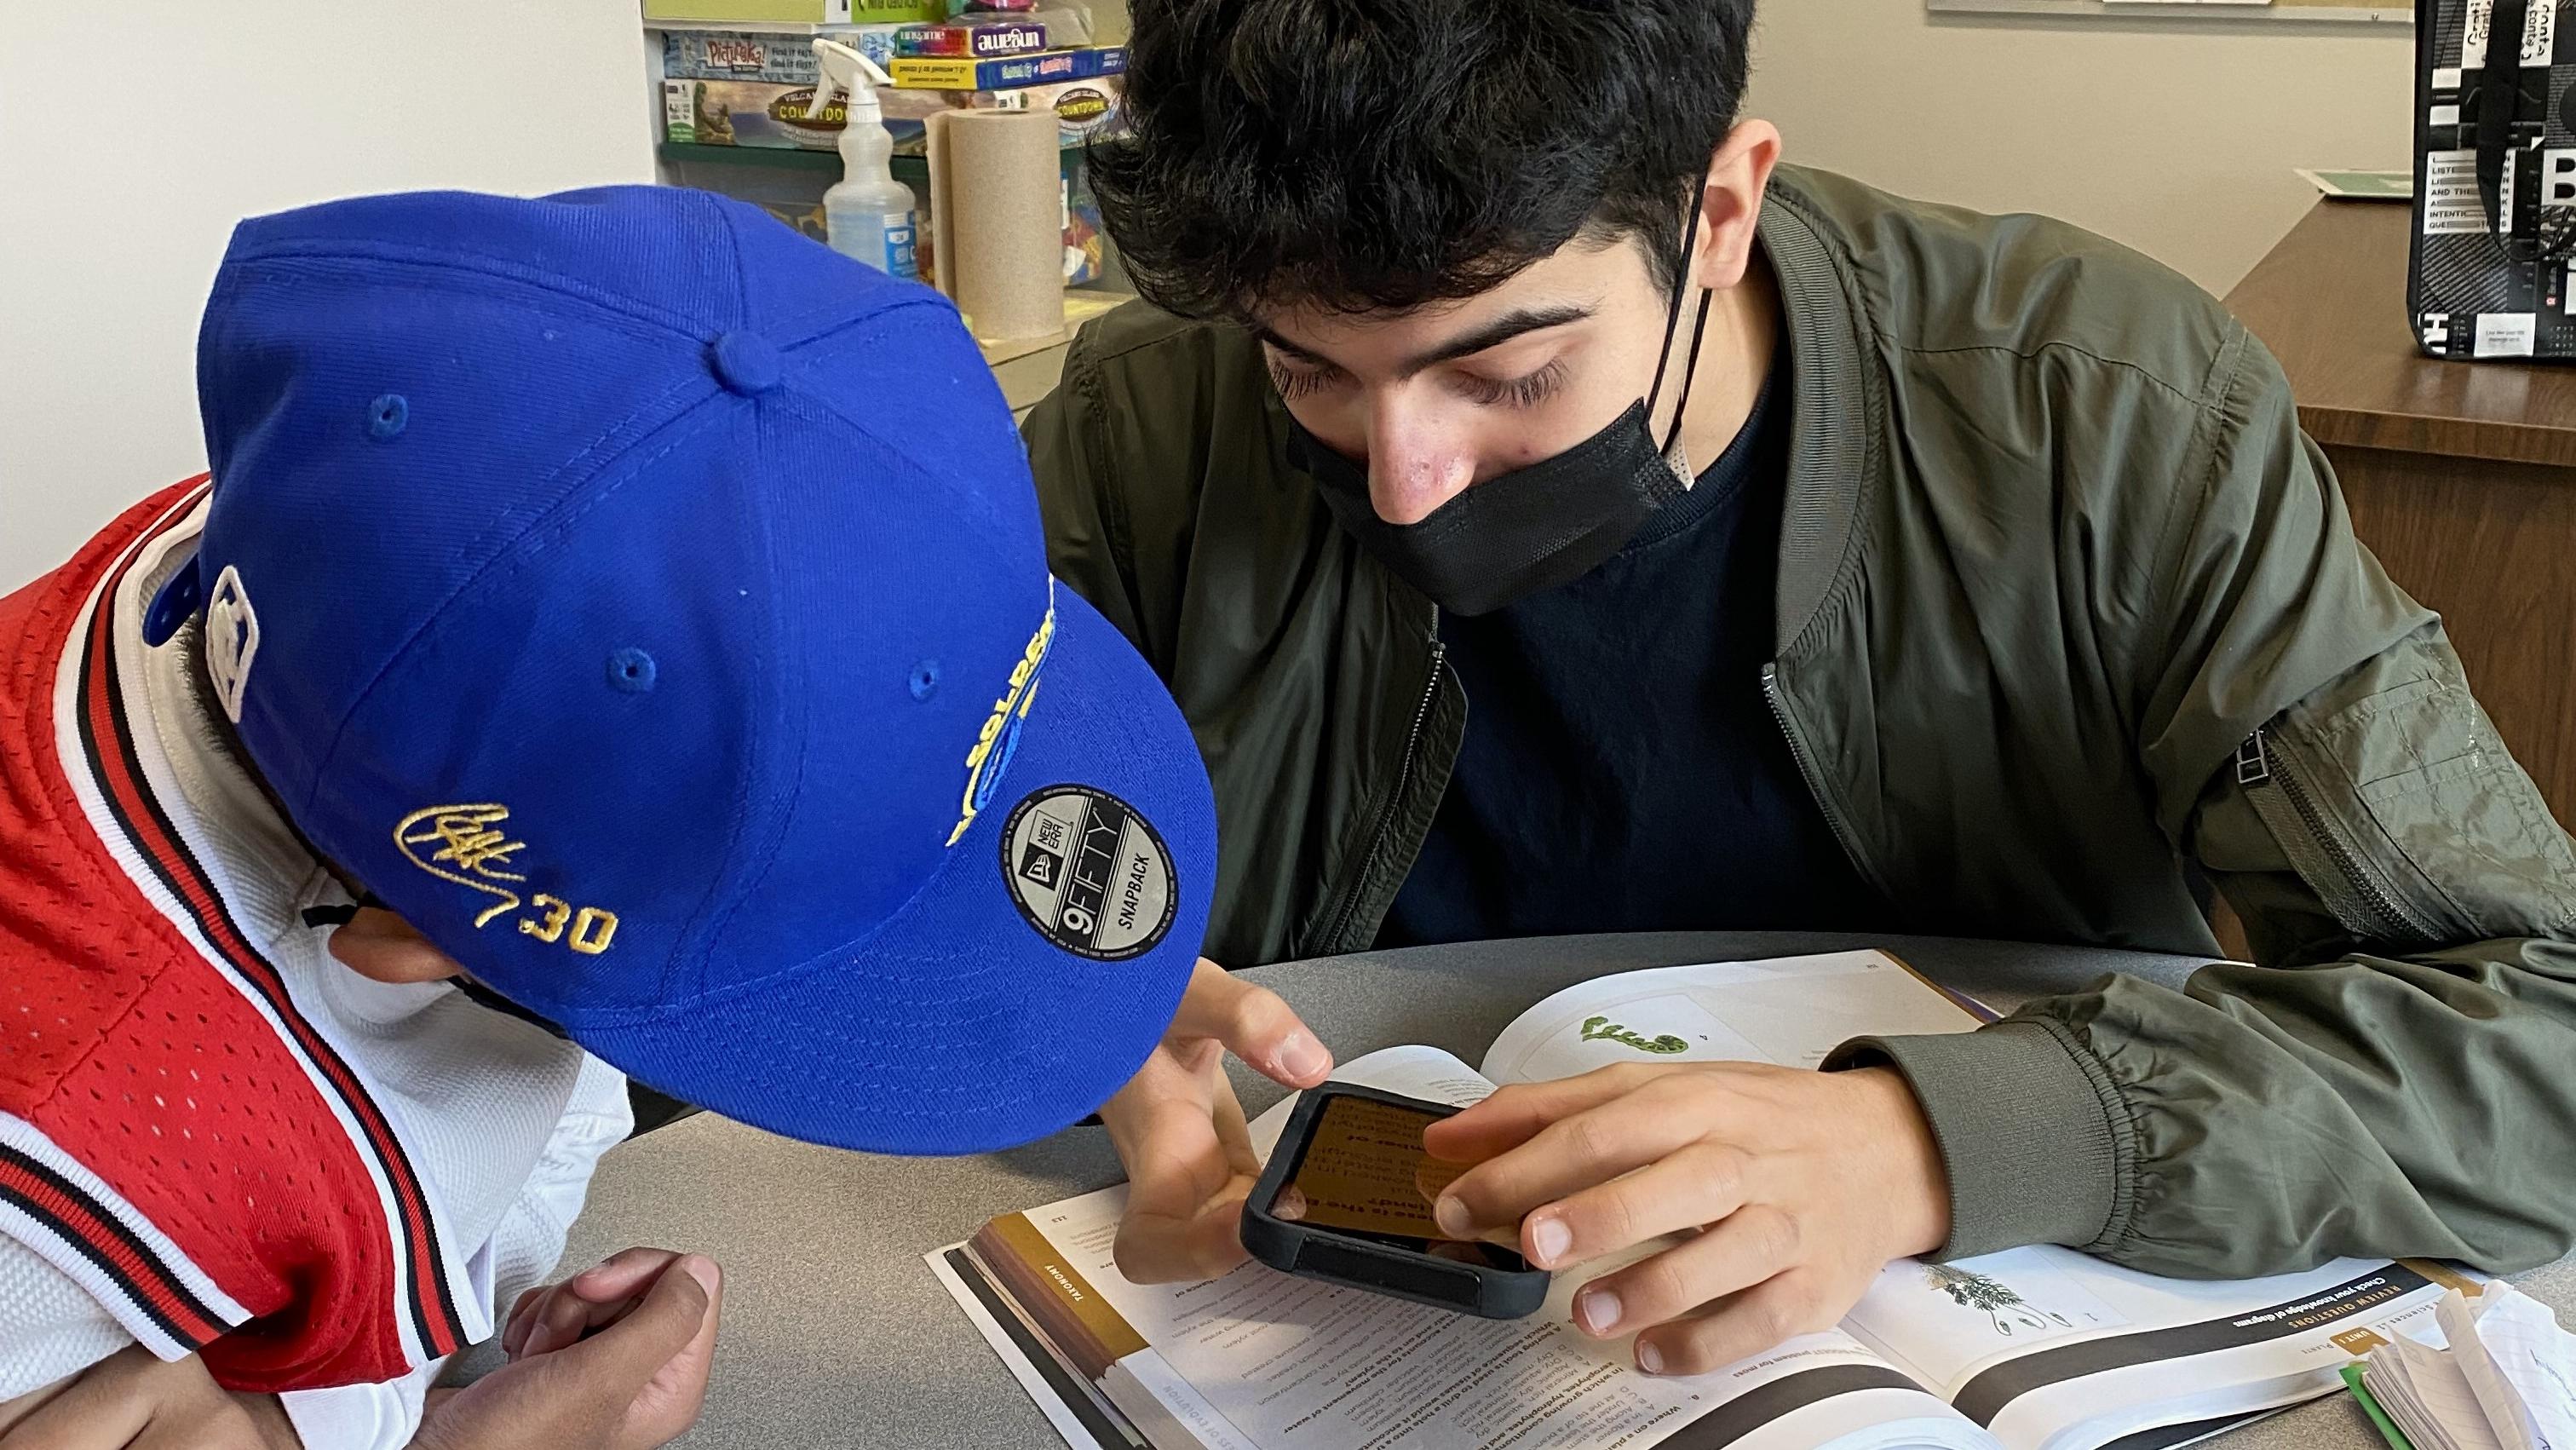 In a classroom, Aidan sits with a young student and shows him the magnification features on his iPhone. Aidan is holding his iPhone over a textbook.  The student intently leans-in for the demonstration.